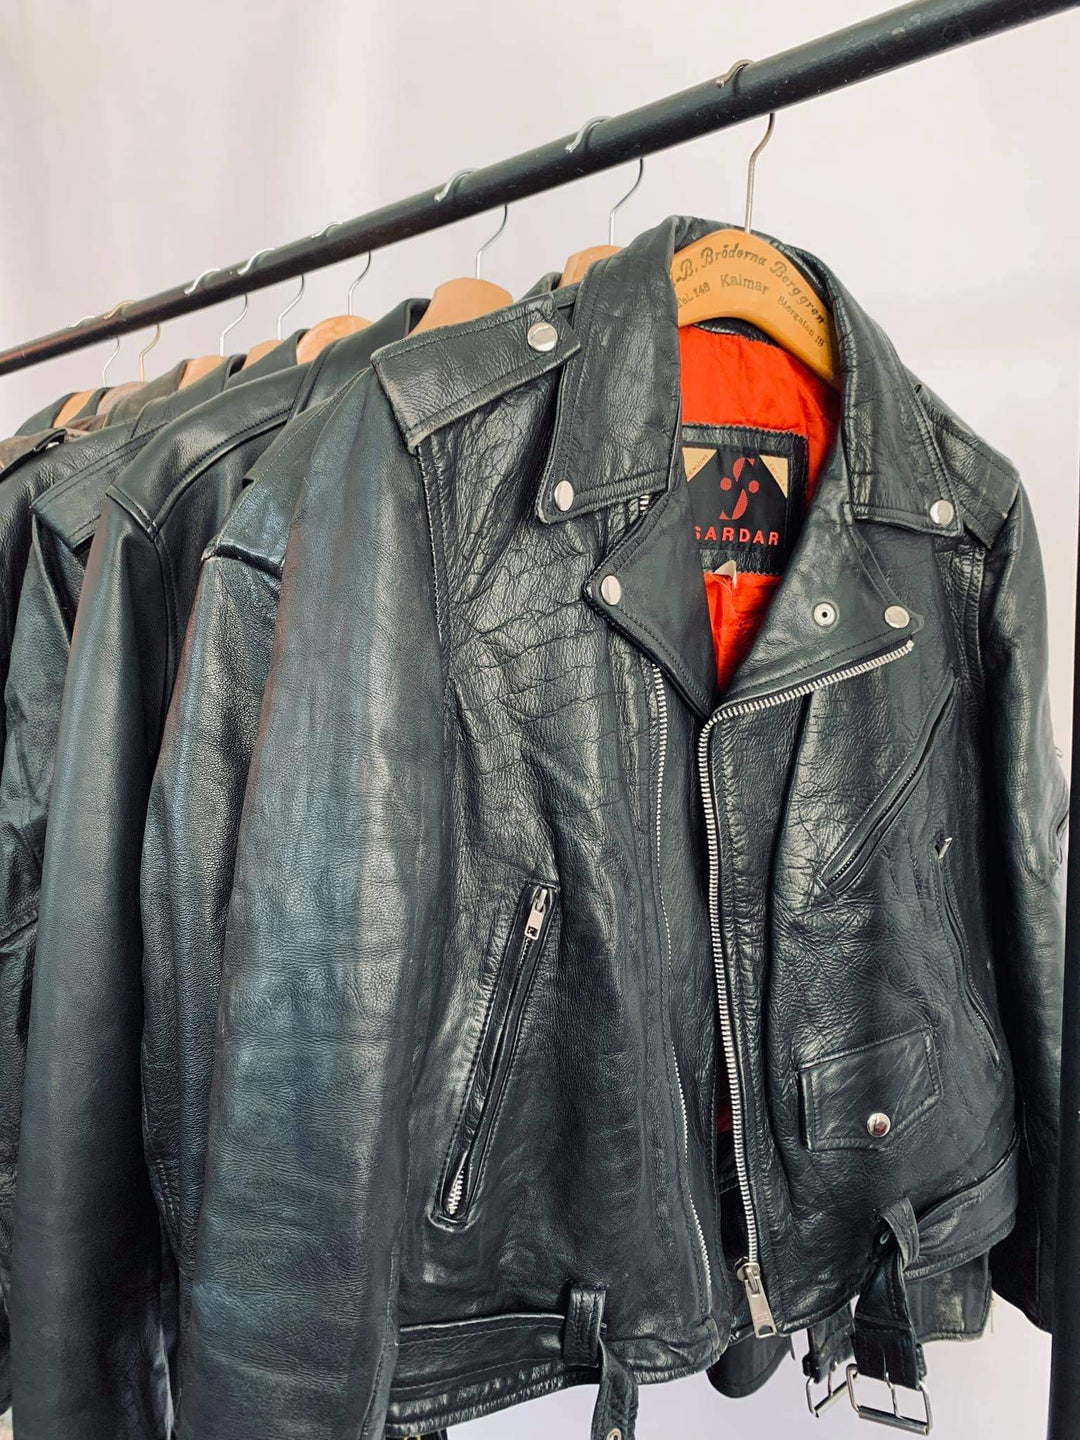 How To Care For A Leather Jacket